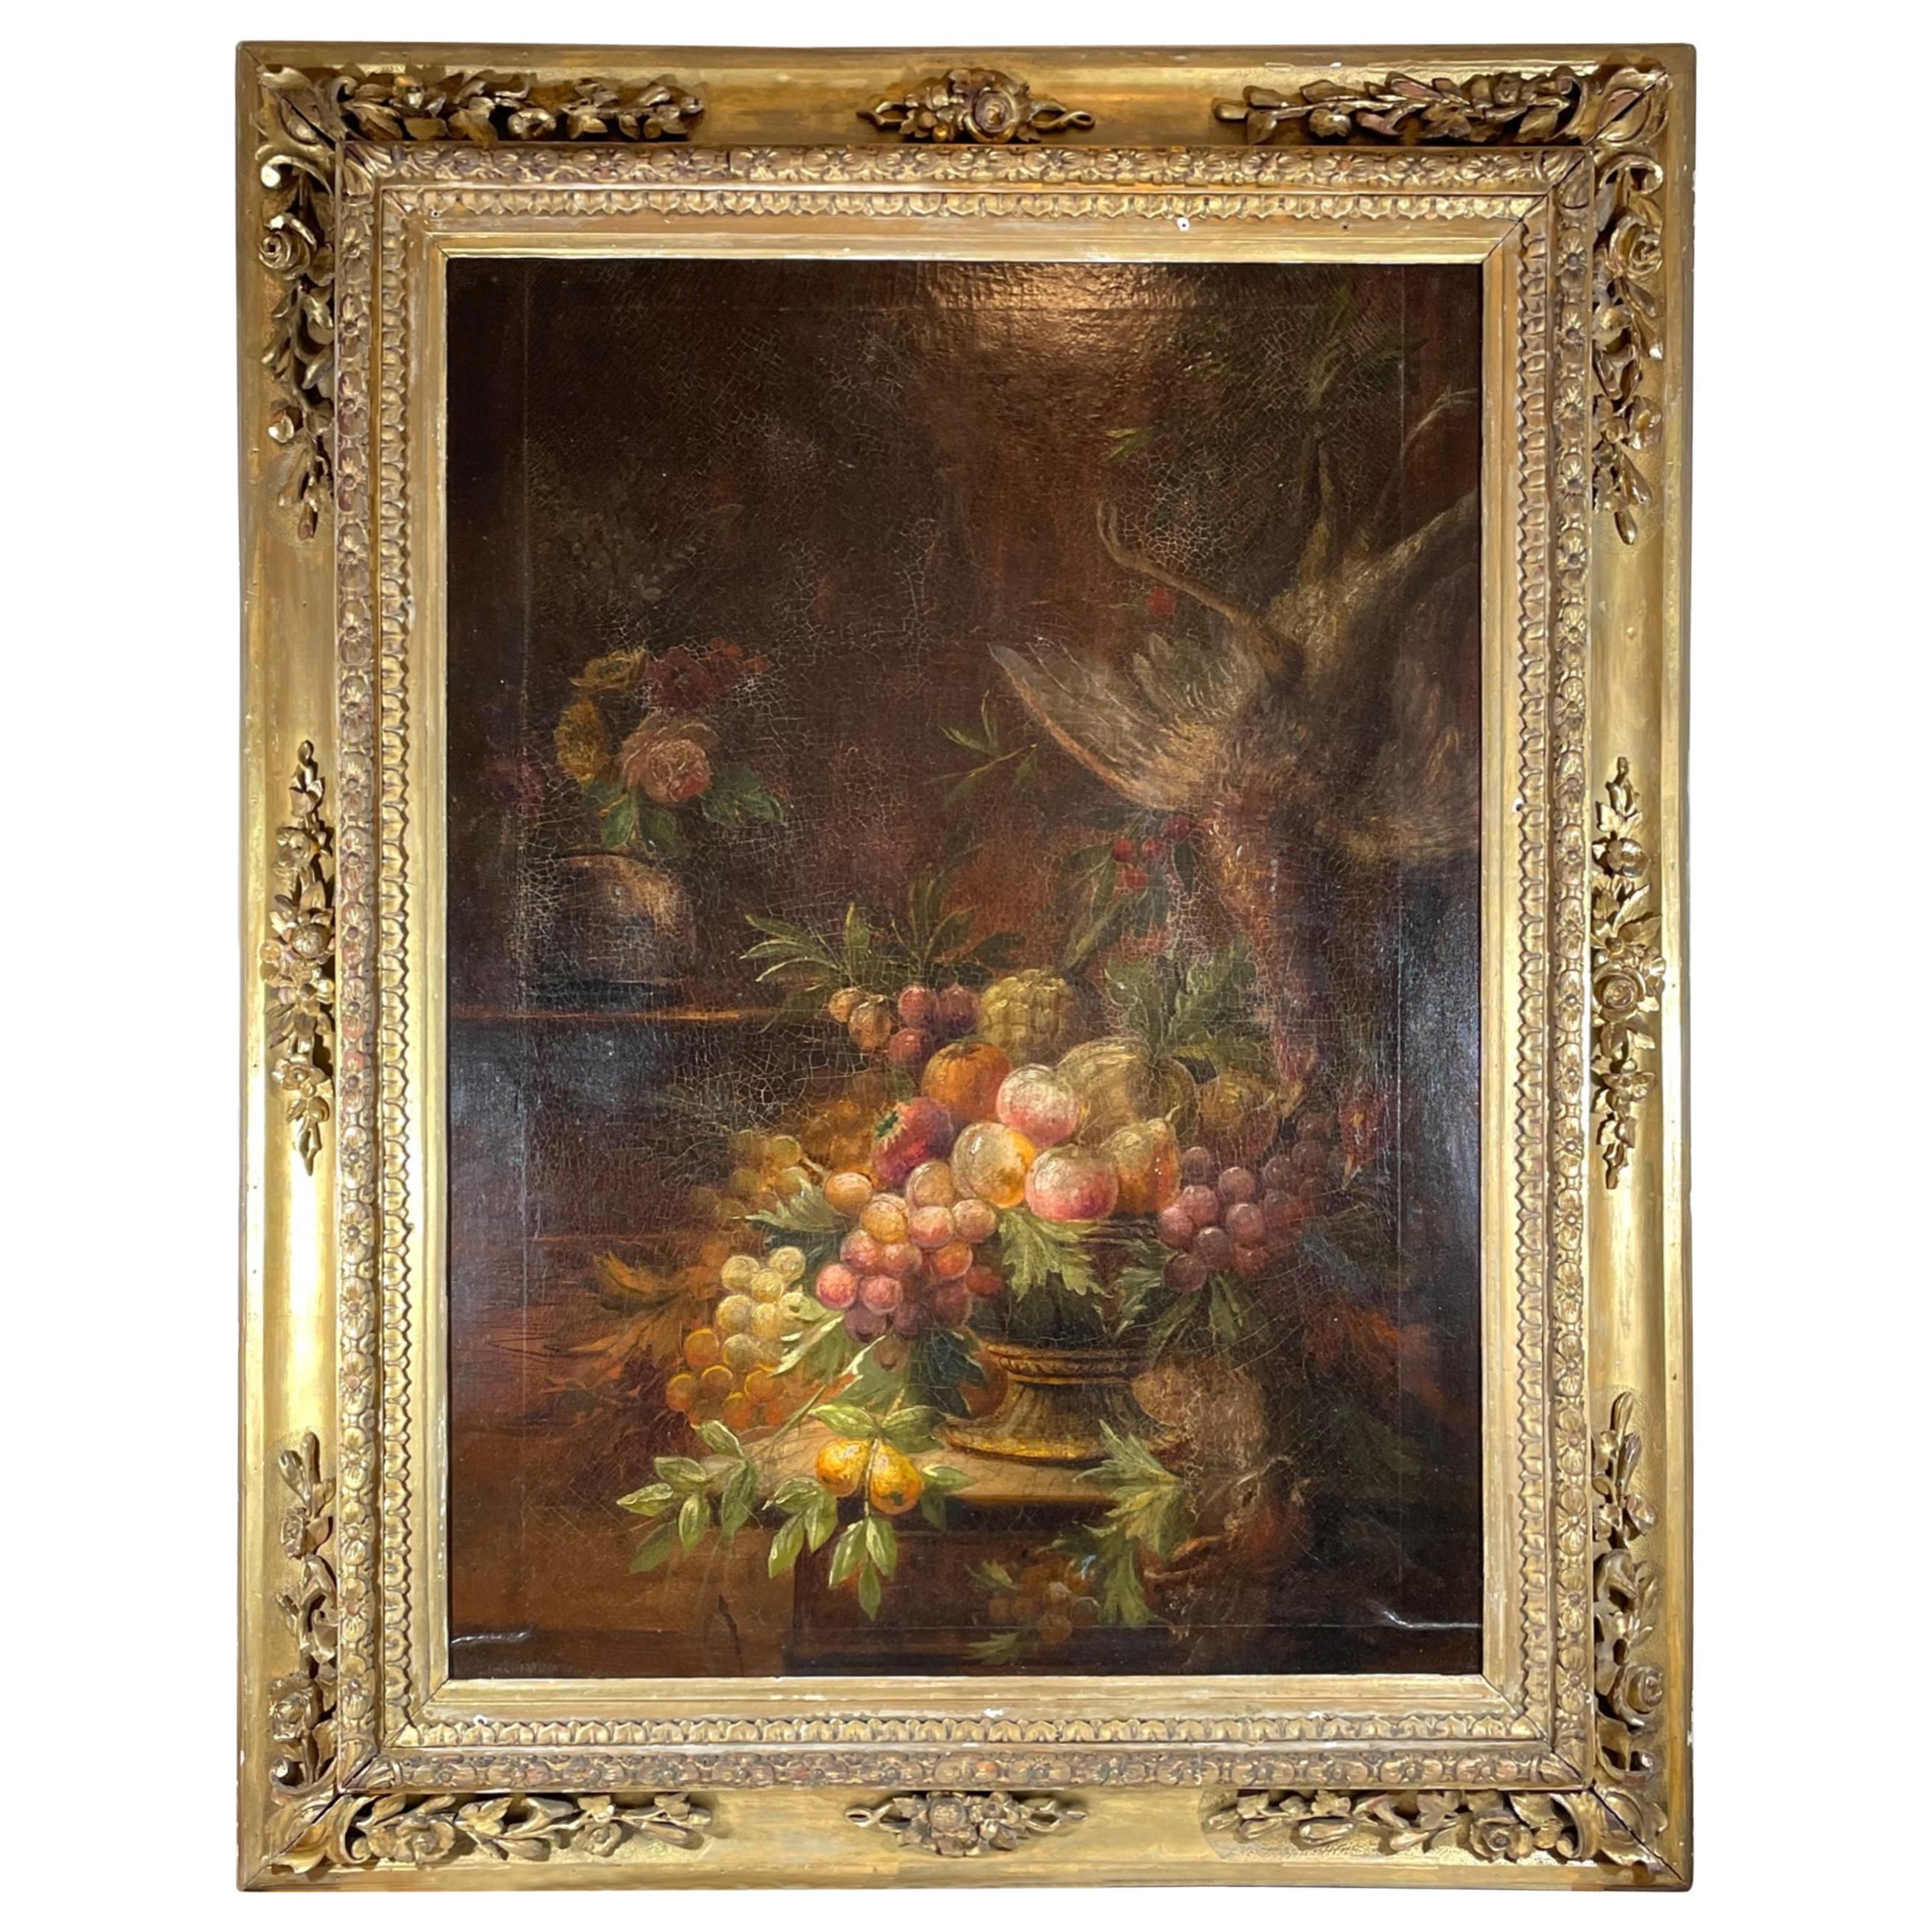 Italian 17th Century Still Life Painting in Period Carved Gilt Frame